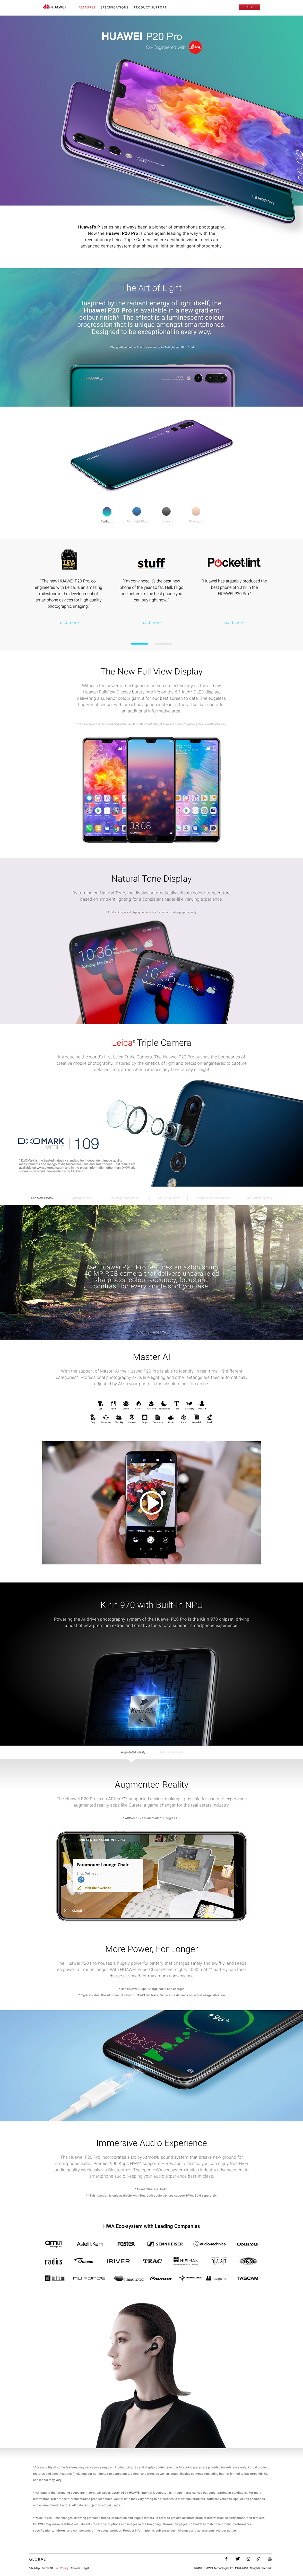 Huawei P20 pro redesign Product Page flagship user interface Web Design 